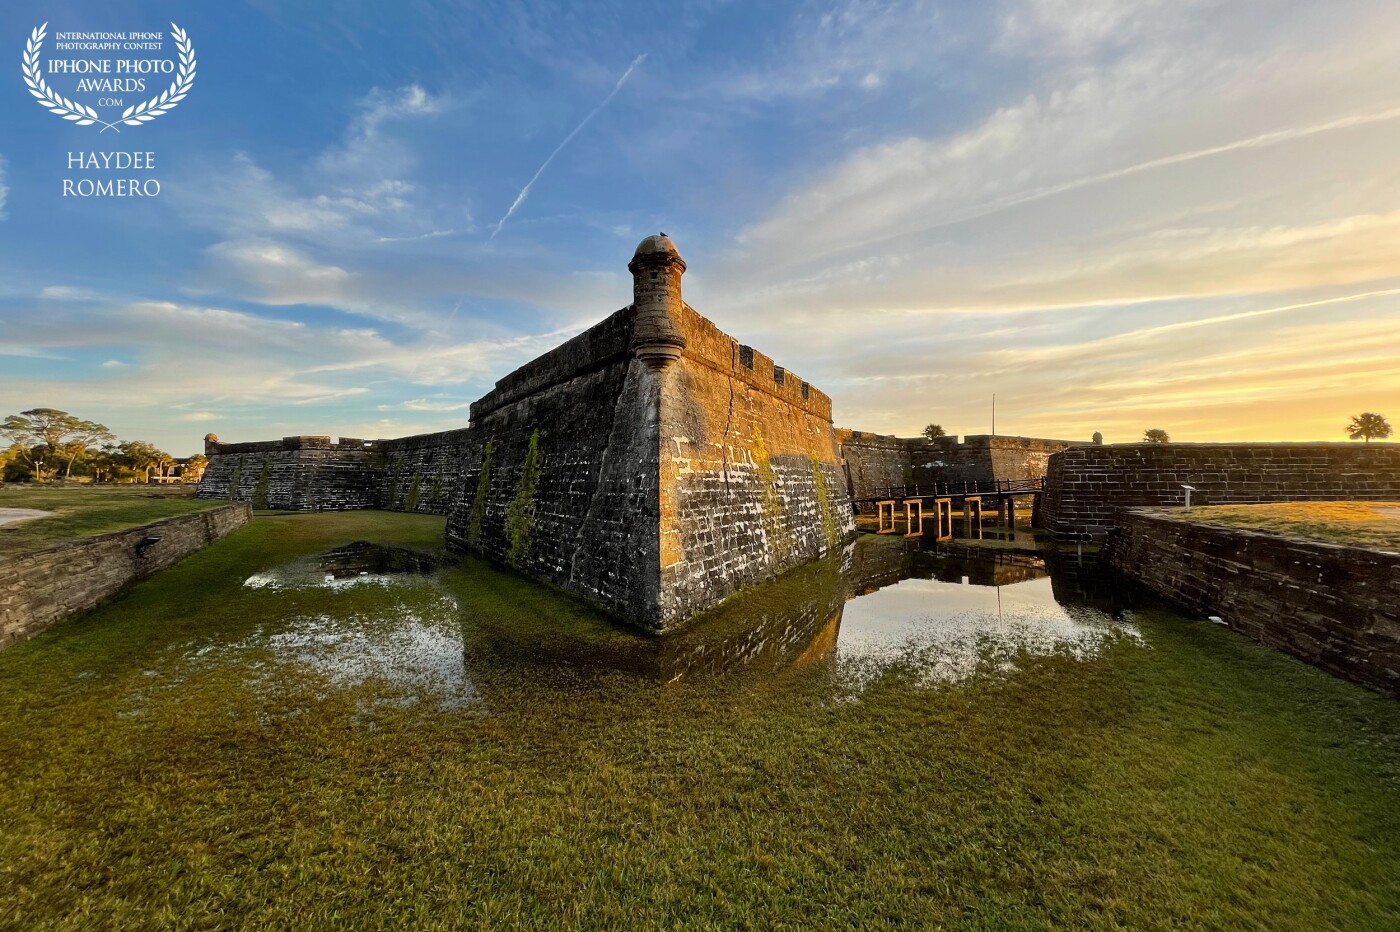 The creeping dusk sends colors across the sky and shadows over the swallow waters of the moat of the Castillo de San Marcos fort in St Augustine, Florida.